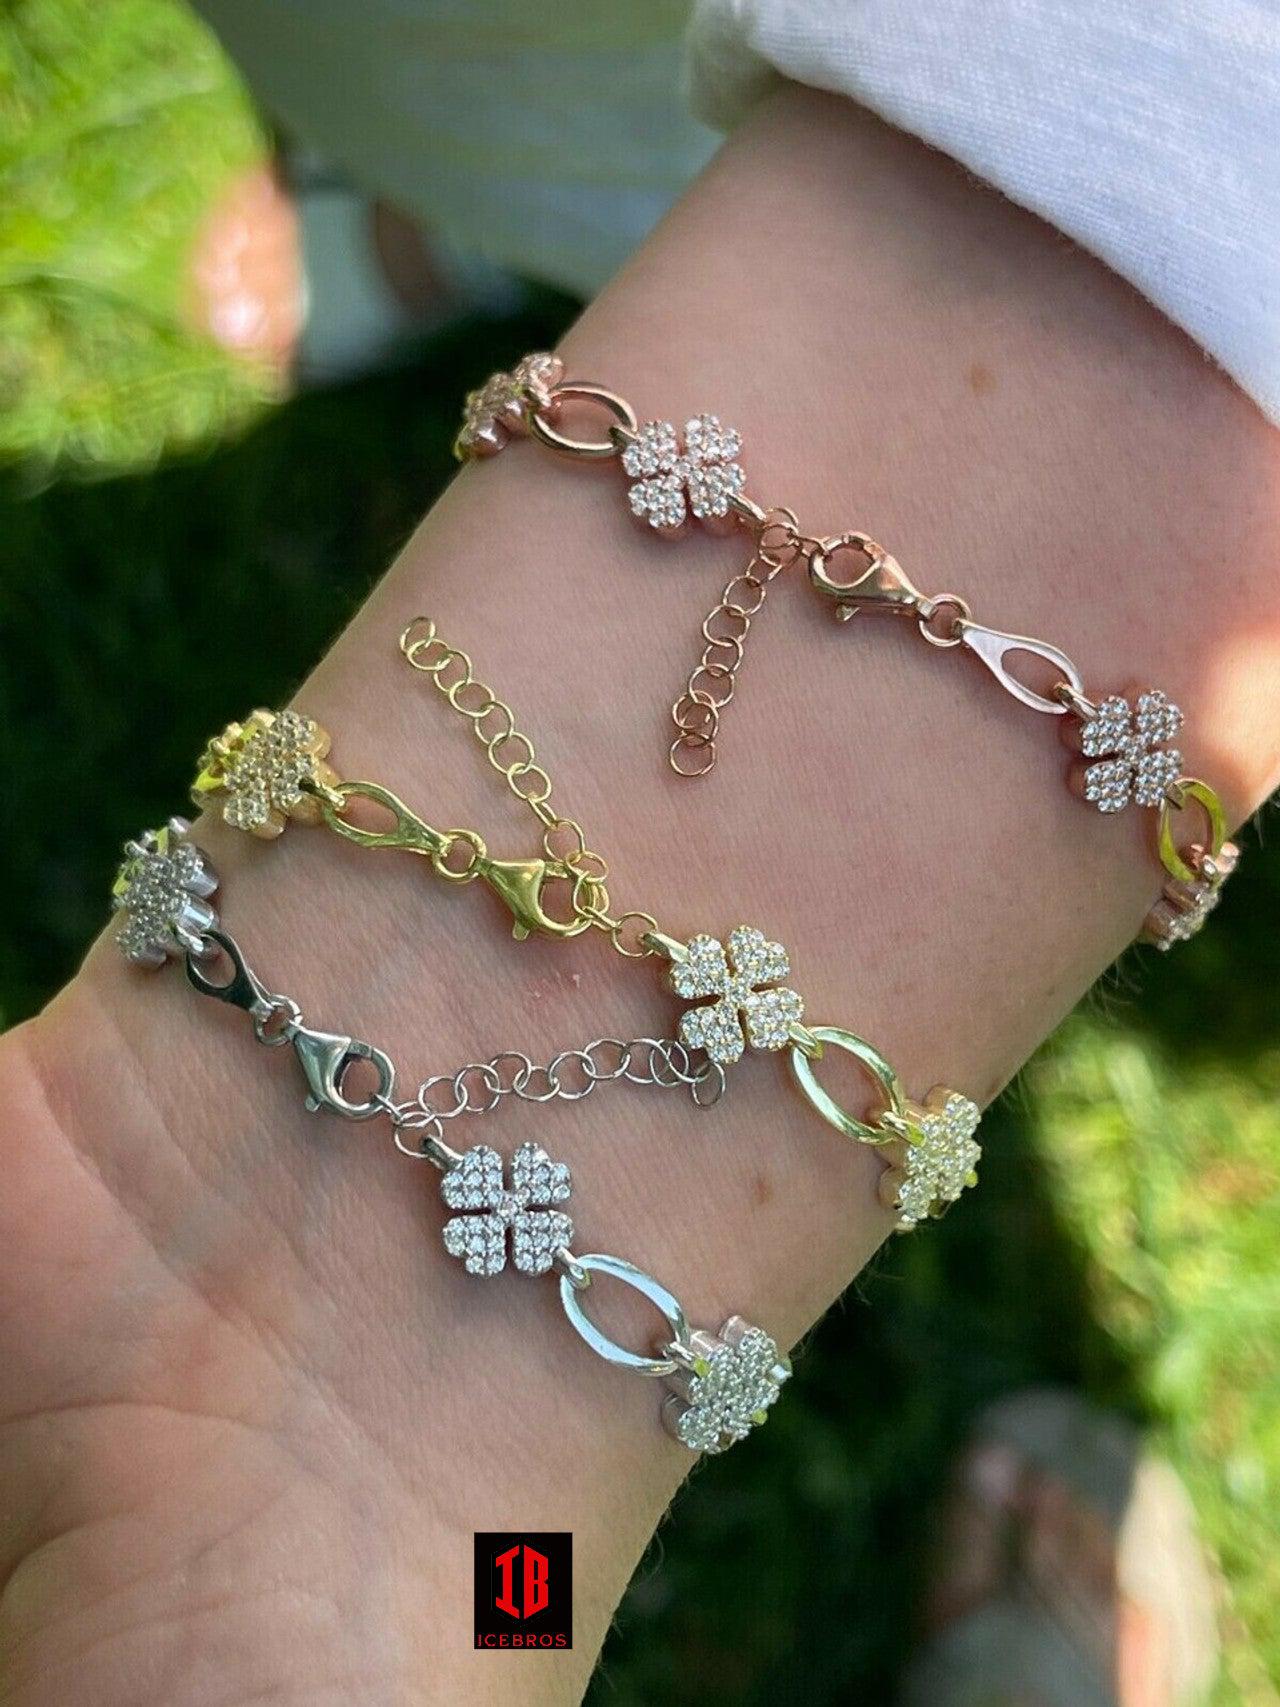 Real 925 Sterling Silver / Yellow Rose Gold Iced Diamond Clover Charm Bracelet